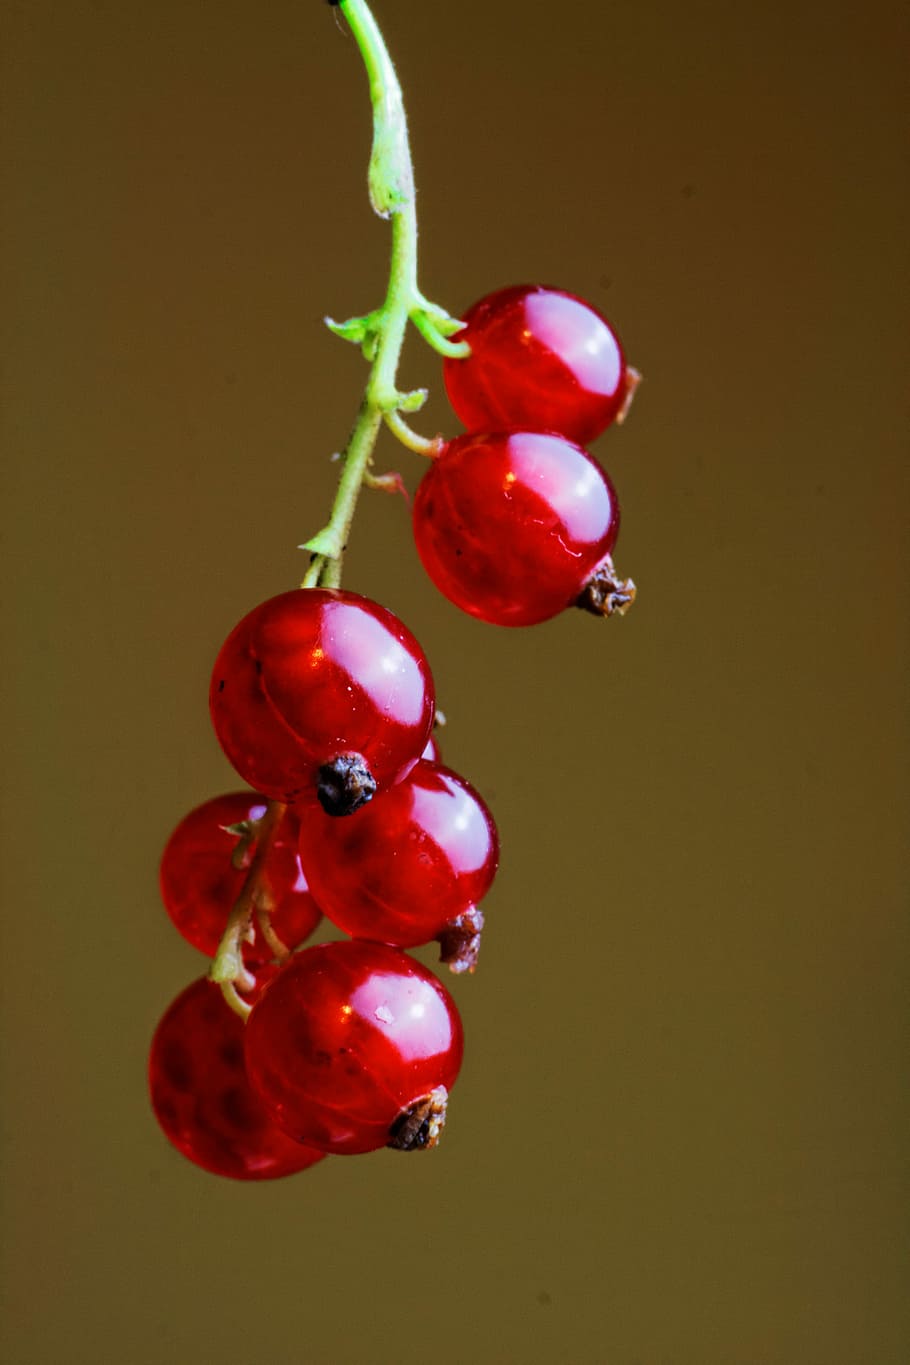 red berries, berries, berry, nature, red, fruit, ripe, berry Fruit, freshness, food